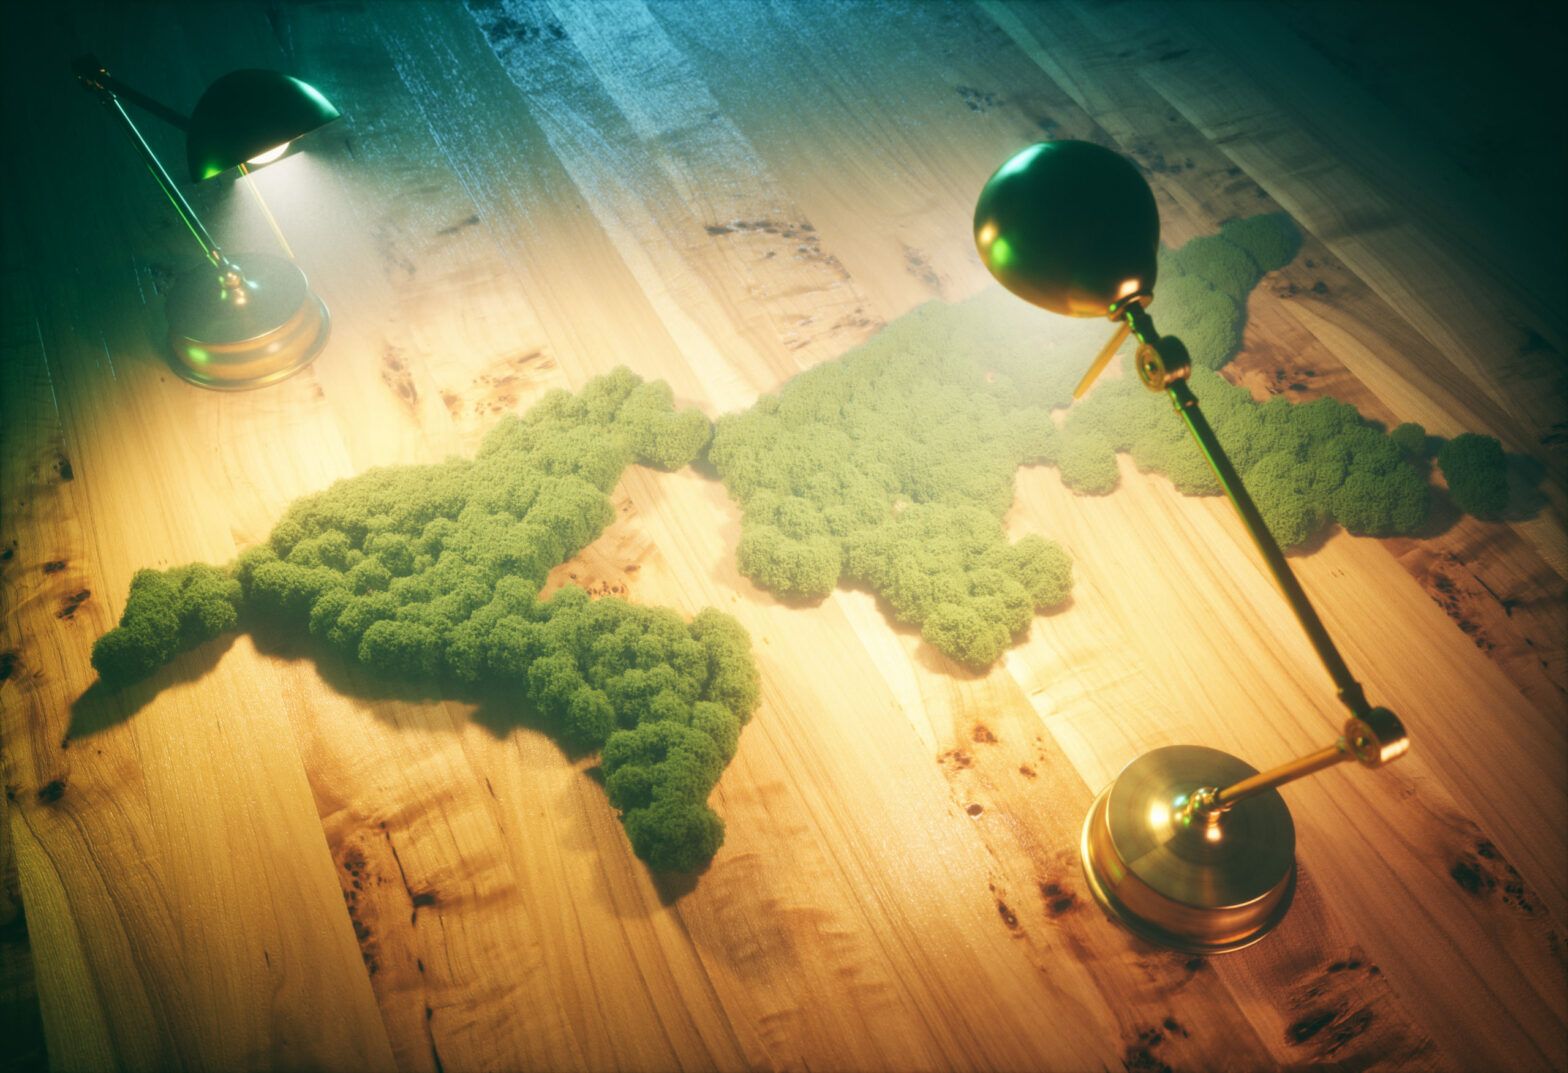 ESG leaders: Net-zero commitments are not enough